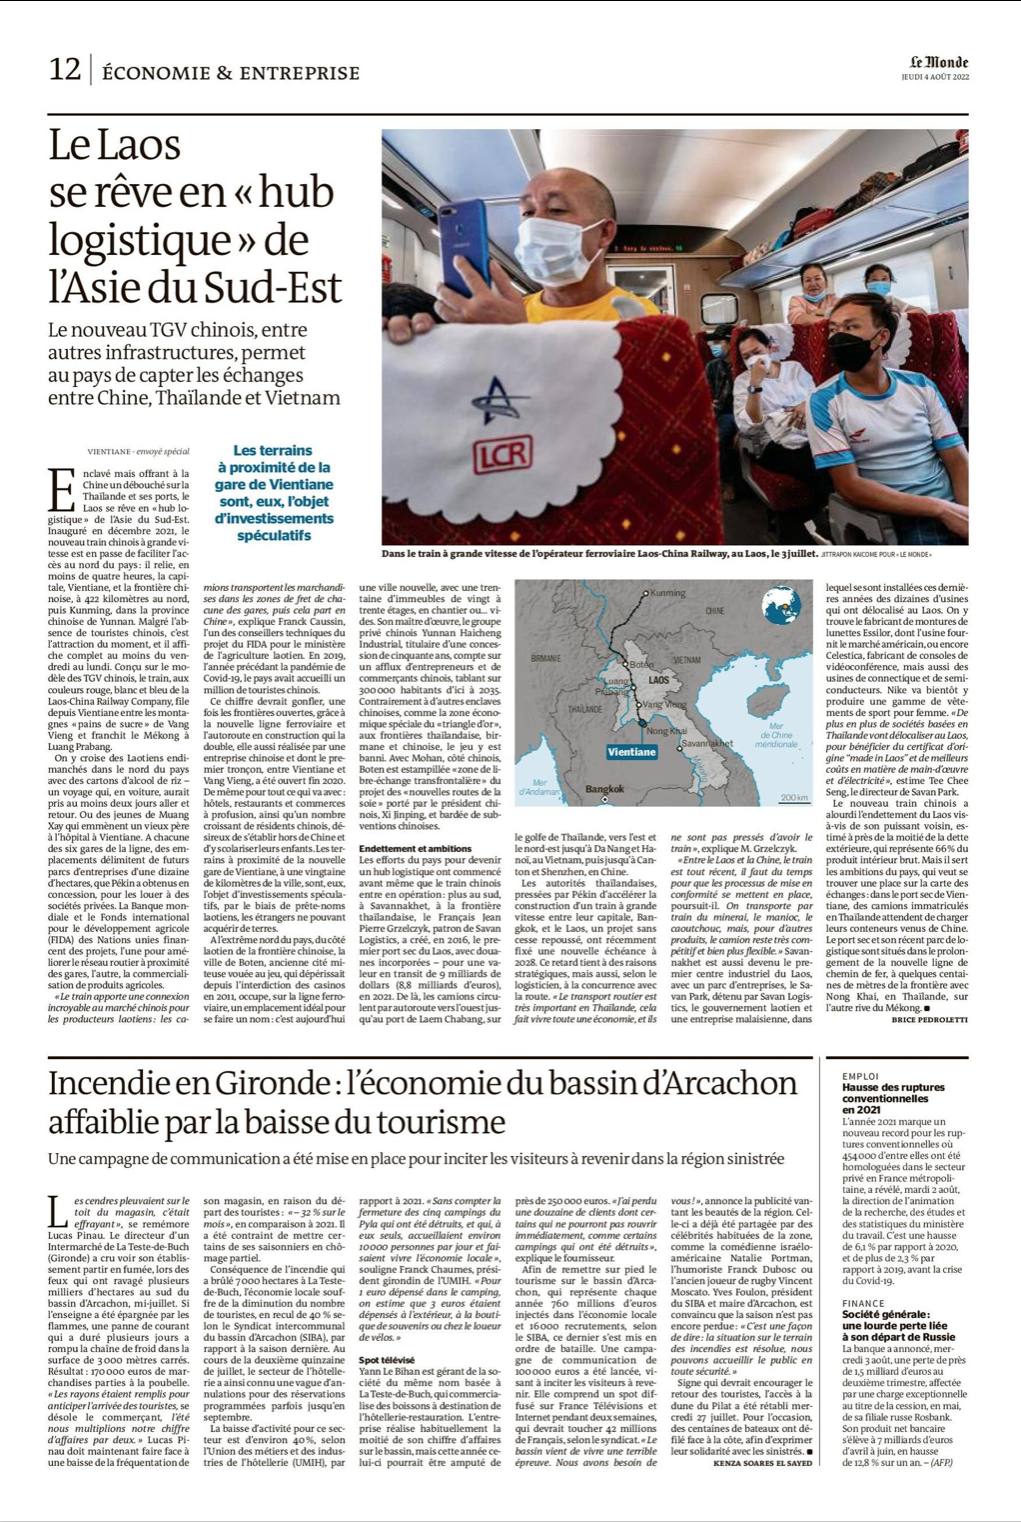 Published Work  -  LE MONDE    In a strategic position, Laos wants to...